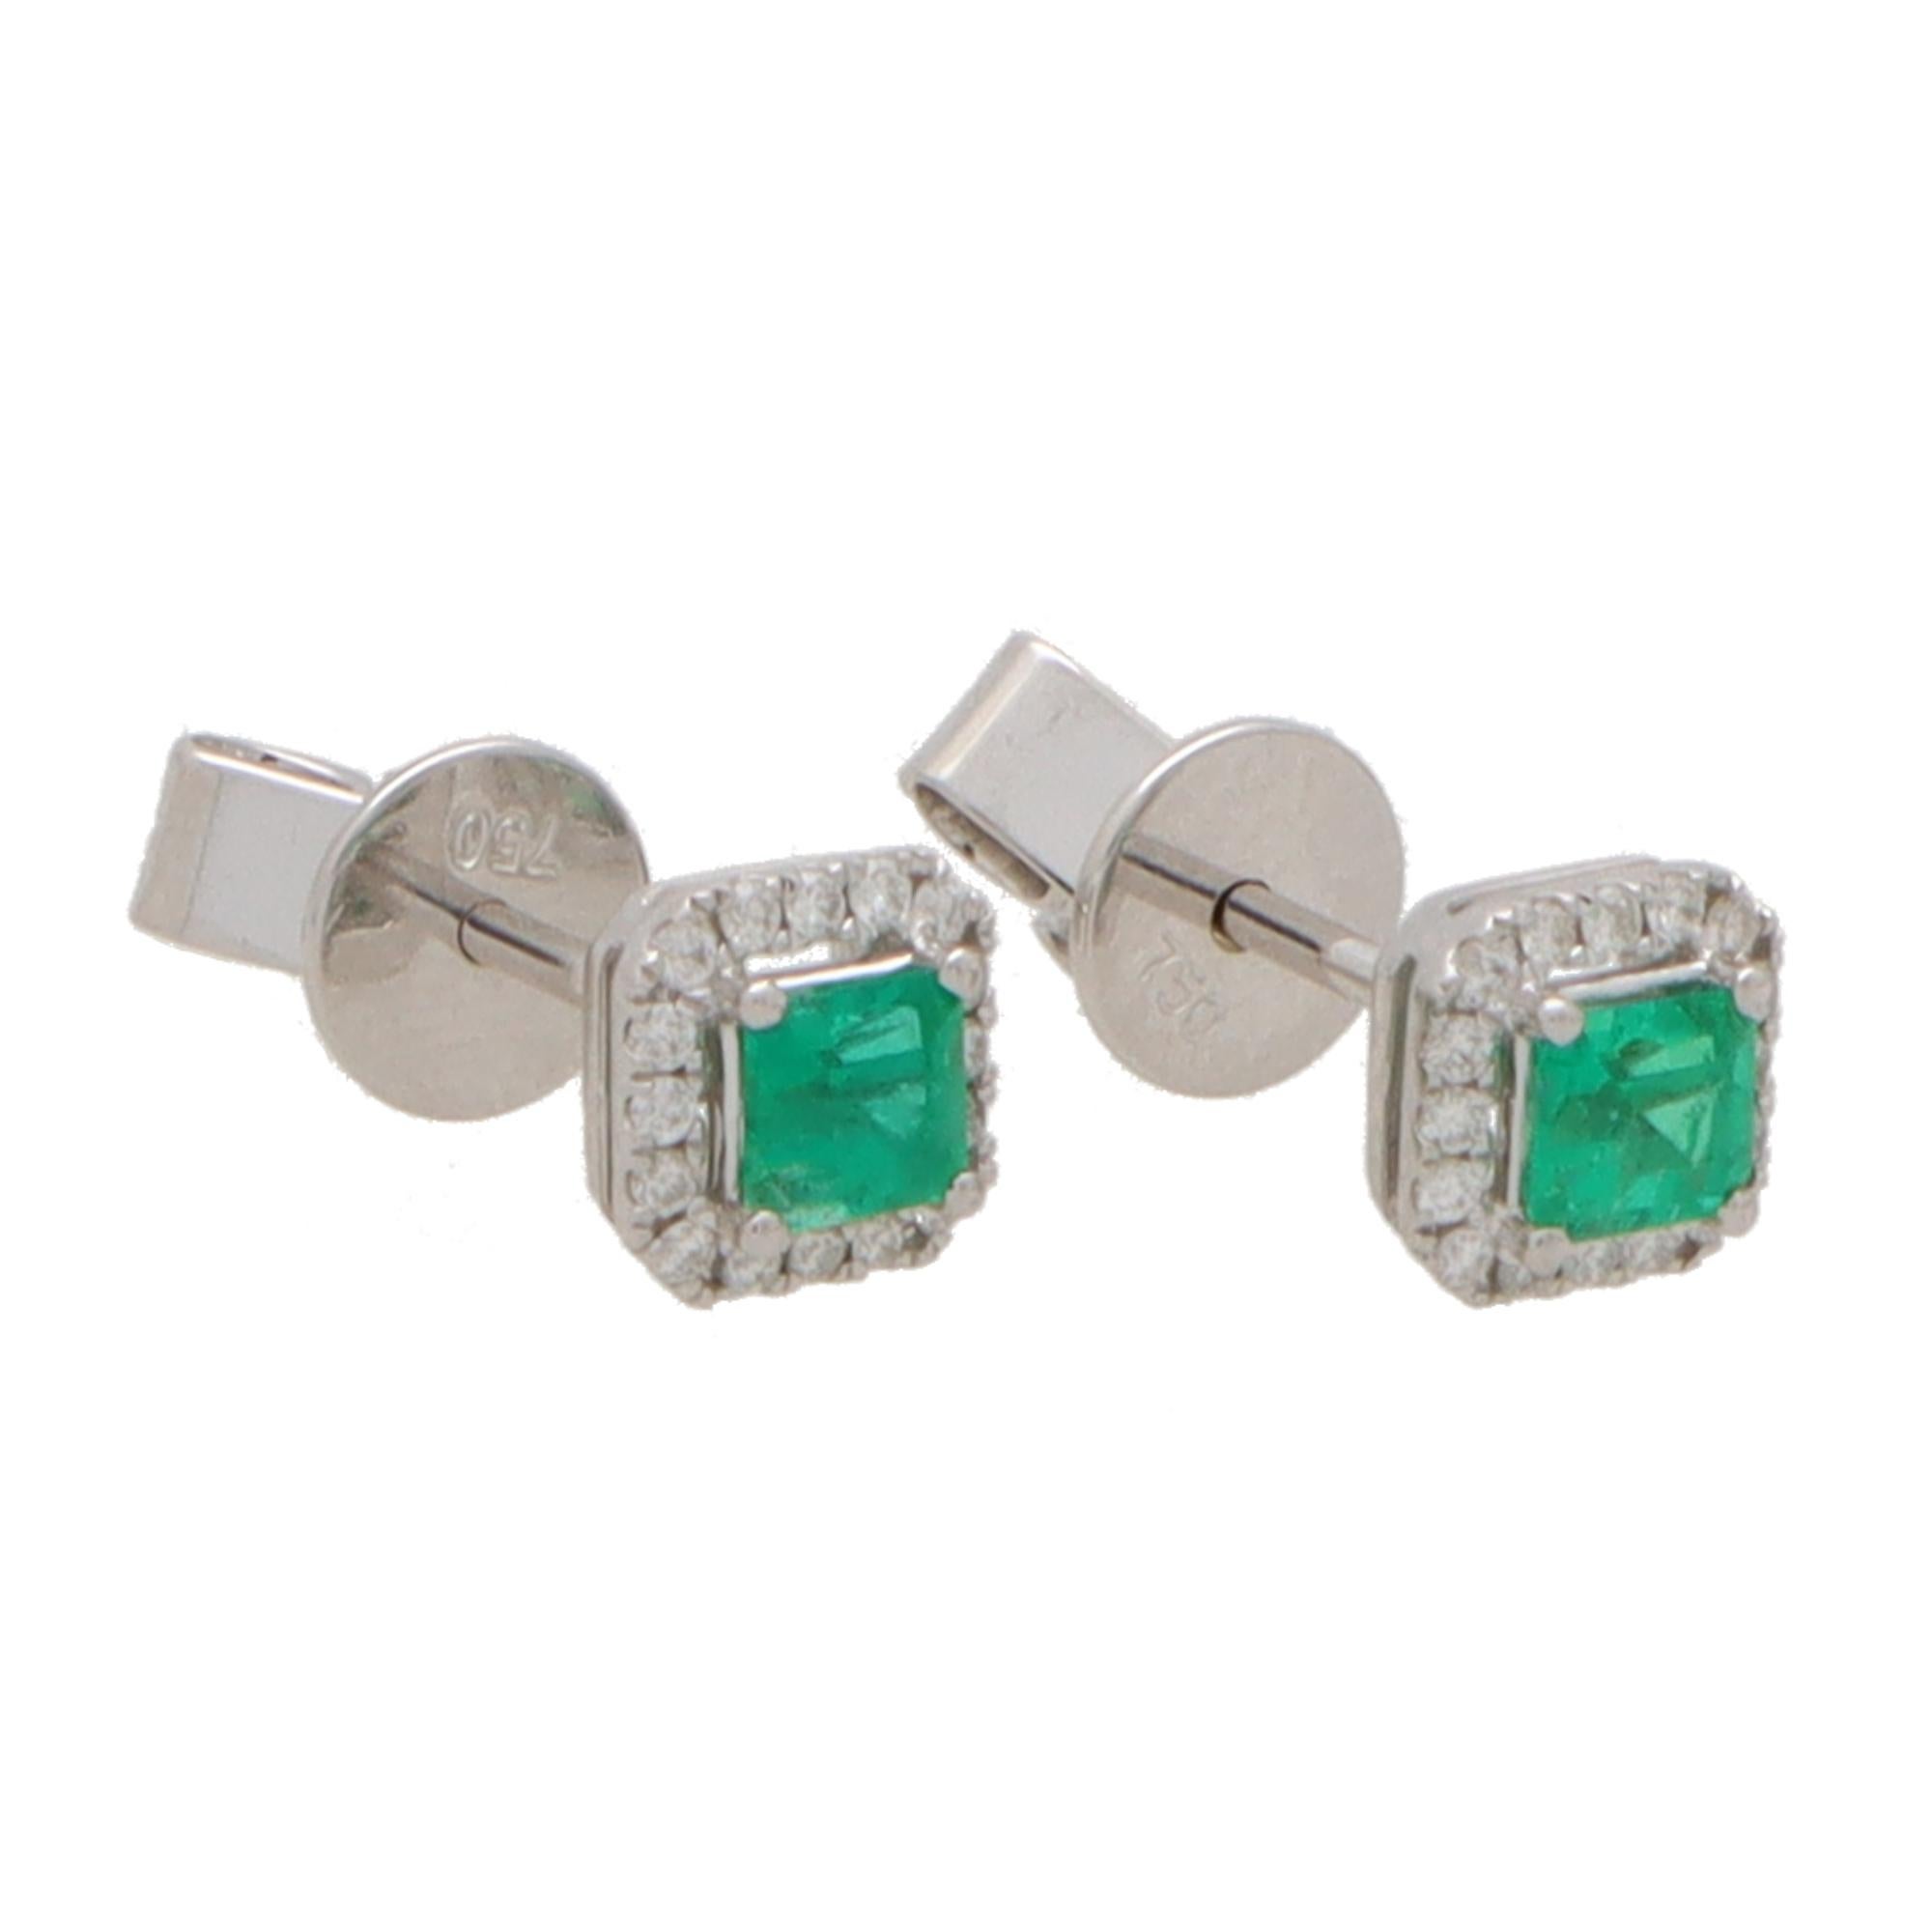  A beautiful pair of vibrant green emerald and diamond cluster earrings set in 18k white gold.

Each earring is composed is a square shape and centrally features a beautiful green square cut emerald which is four claw set securely. Surrounding each